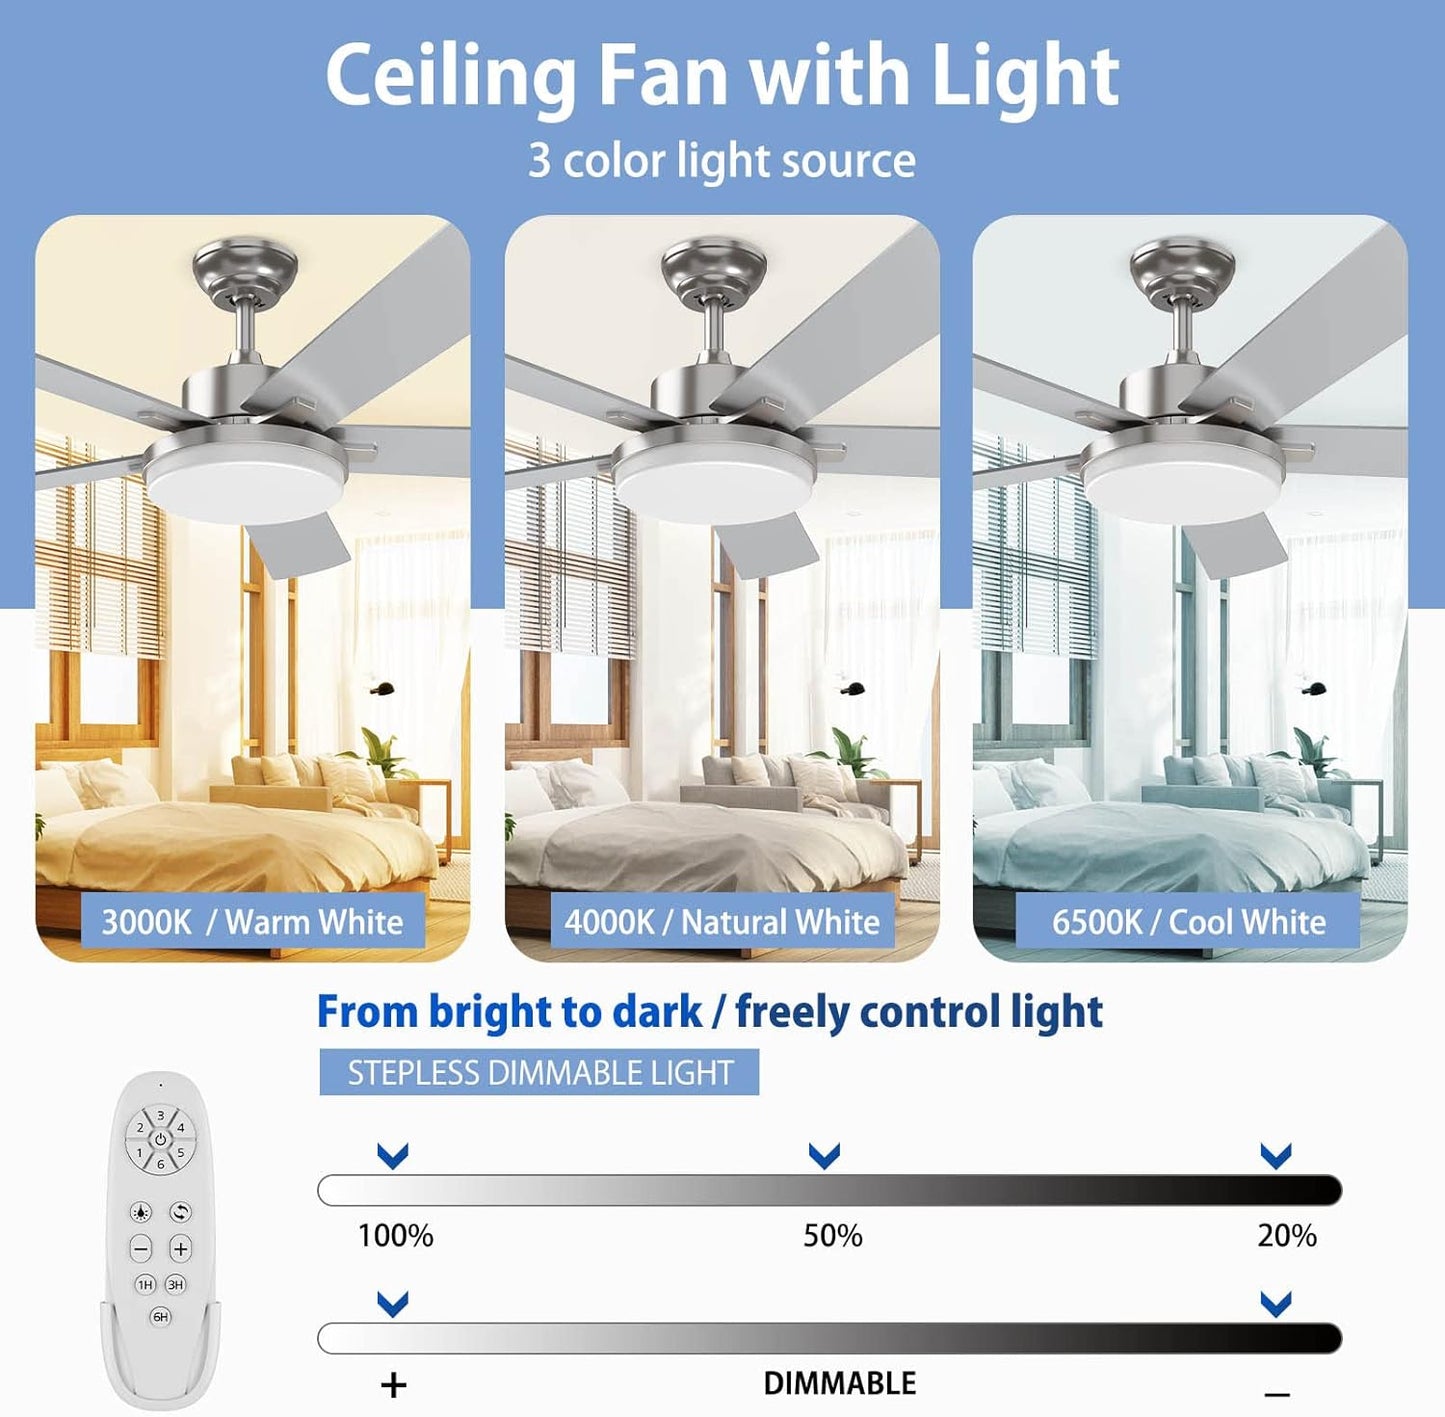 Regair Ceiling Fans with Lights, 52 Inch Ceiling Fan with Lights and Remote Control, Modern Brushed Nickel Ceiling Fan with Light for Living Room Farmhouse Bedroom (Brushed Nickel, 52 inch)